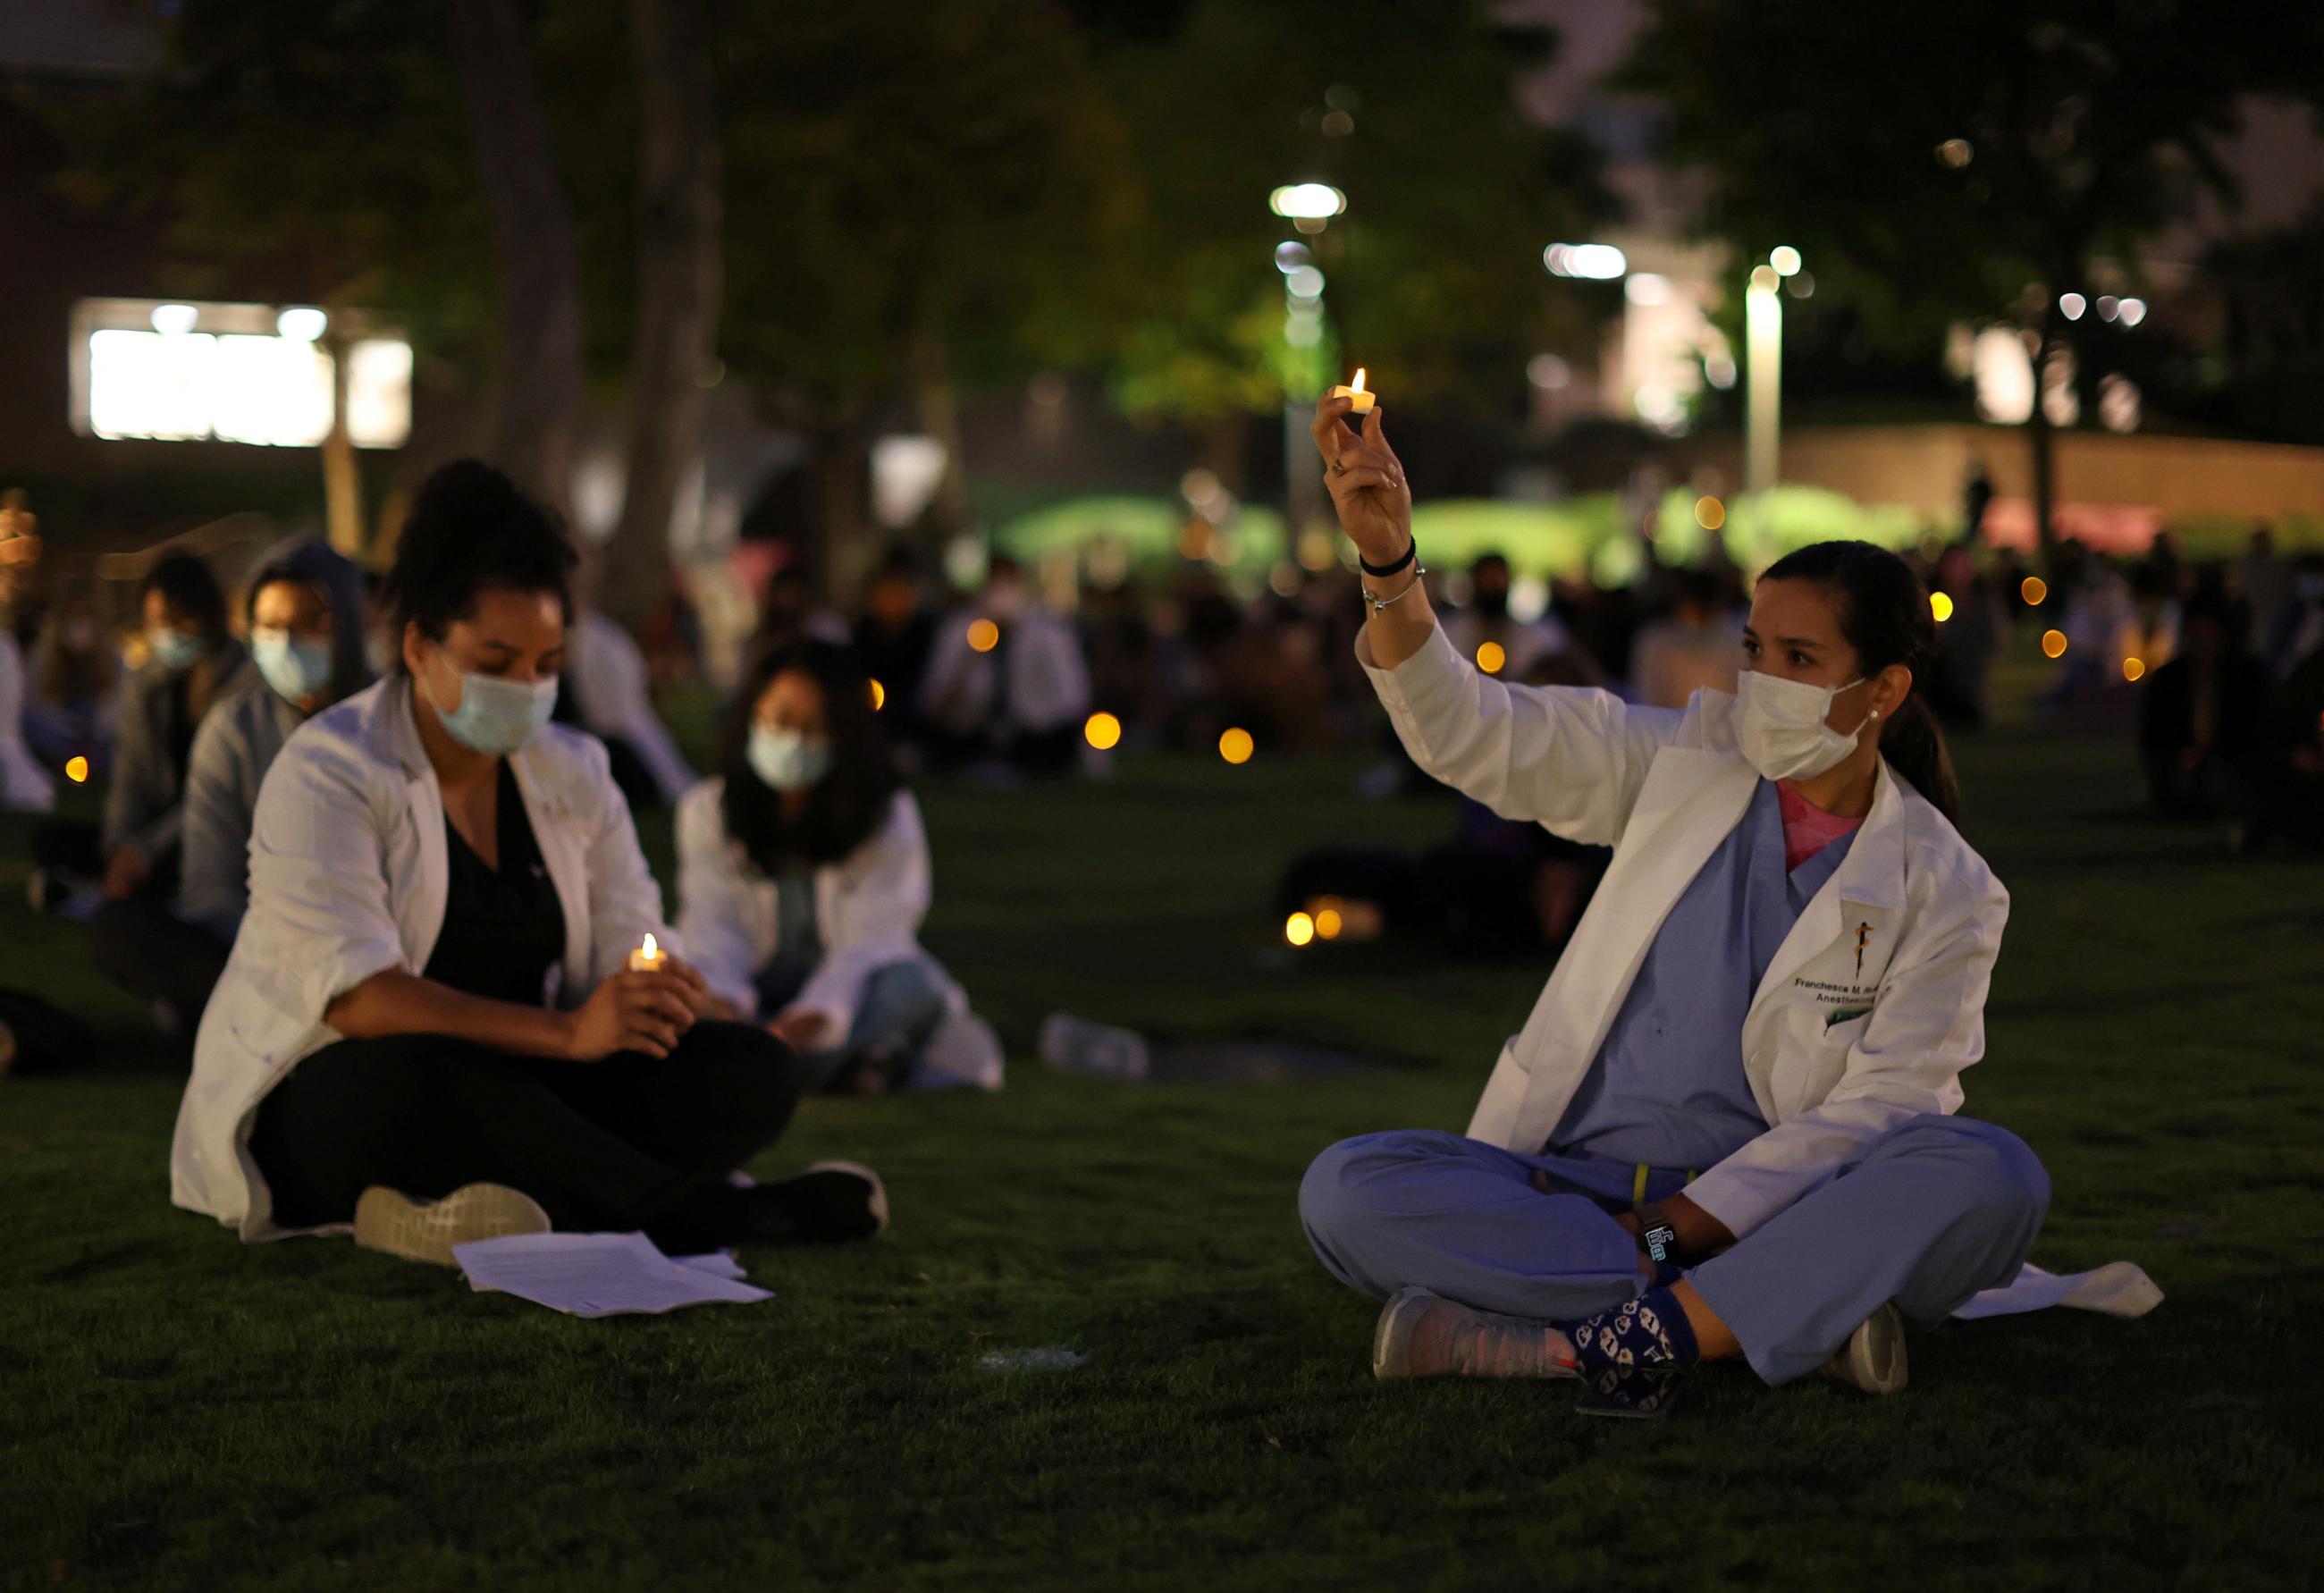 Healthcare workers in labcoats sit on a lawn holding lit candles at a vigil against systemic racism and police brutality